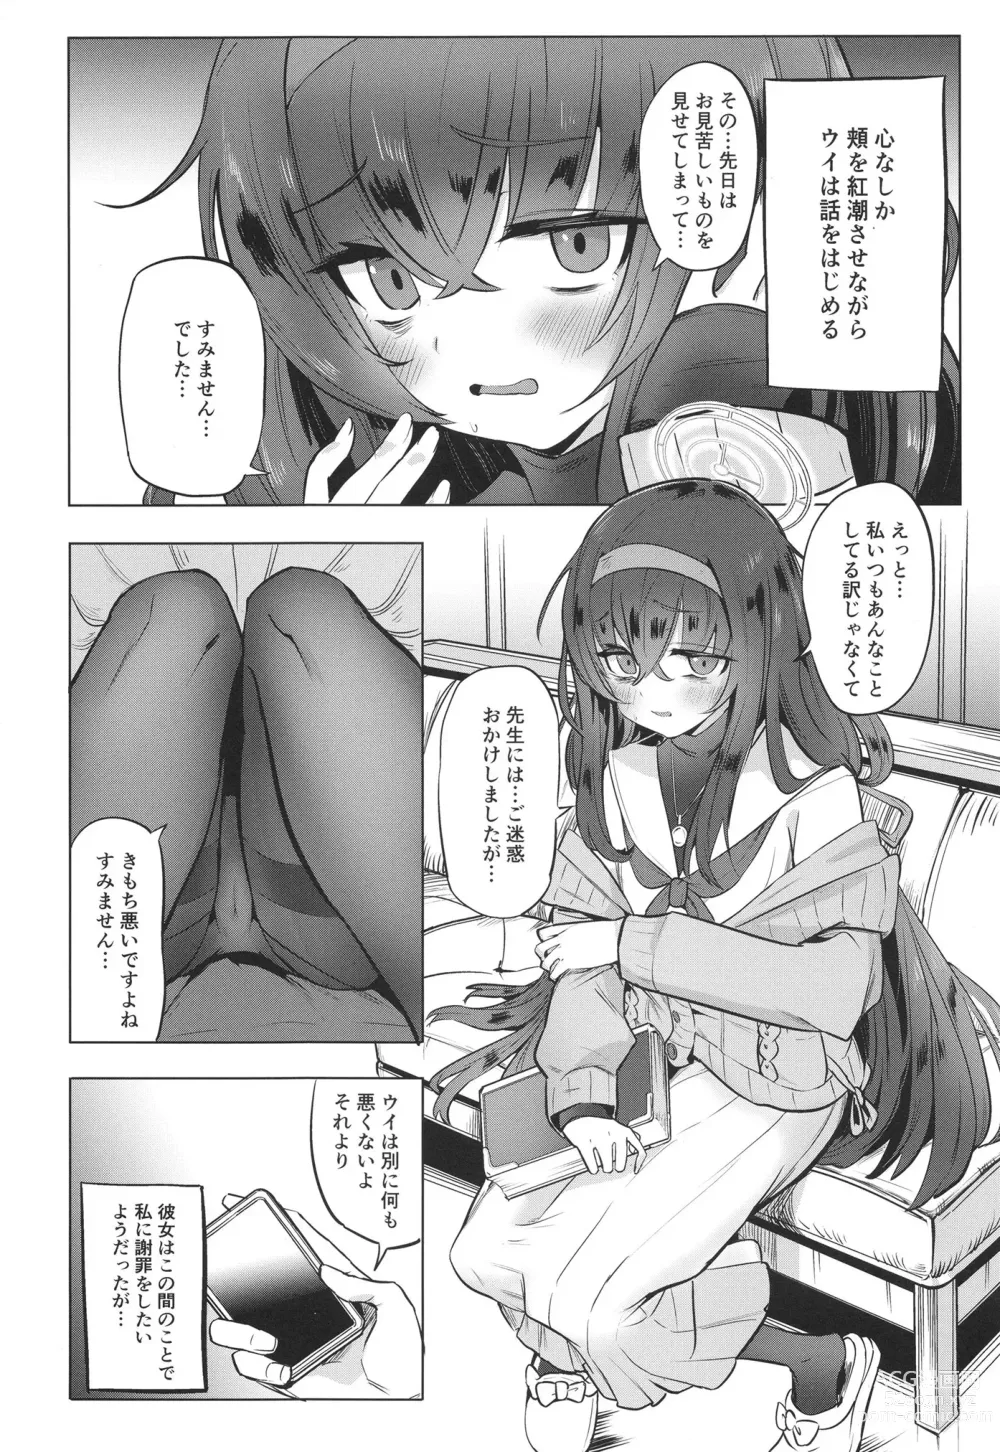 Page 6 of doujinshi I miss you